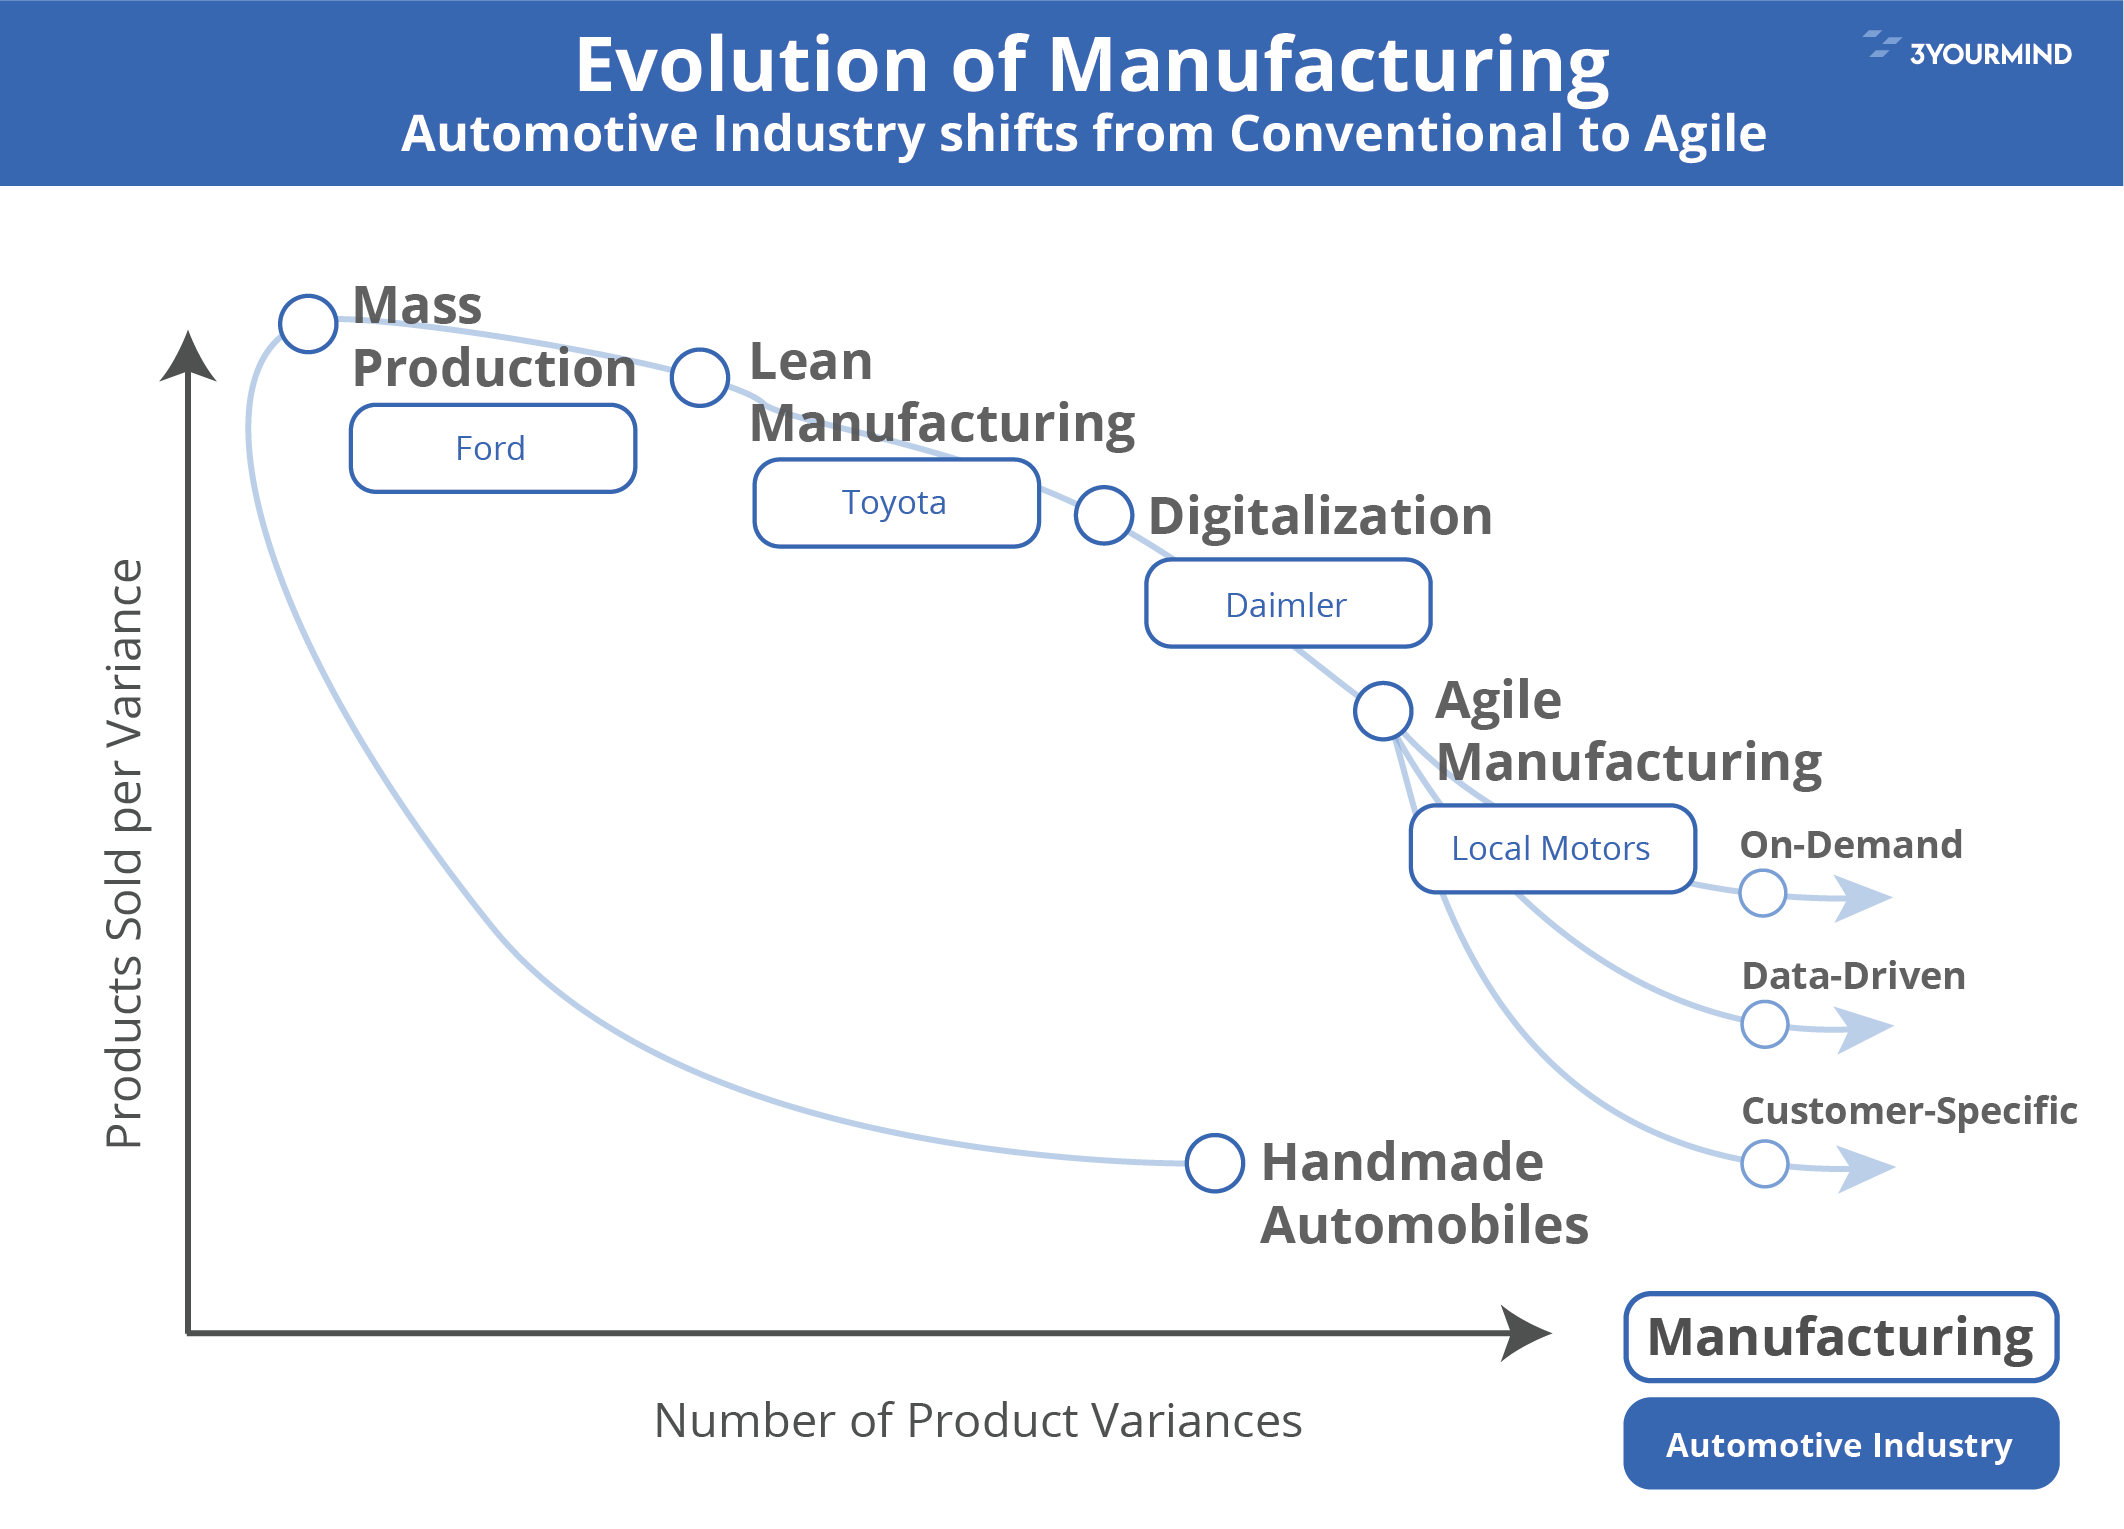 Evolution of manufacturing - from Conventional to Agile Manufacturing